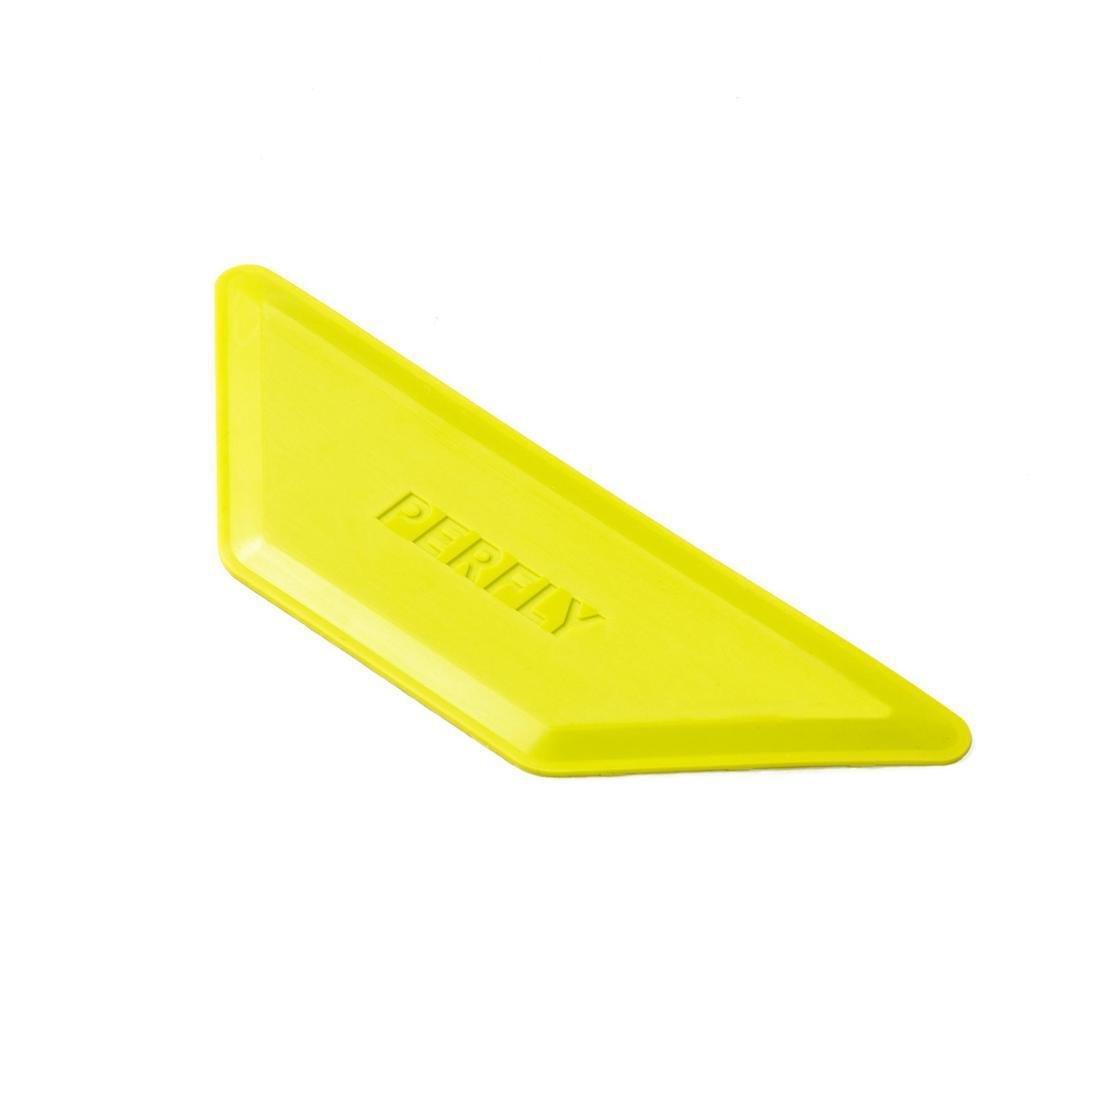 PERFLY - Badminton Court Marker, Yellow